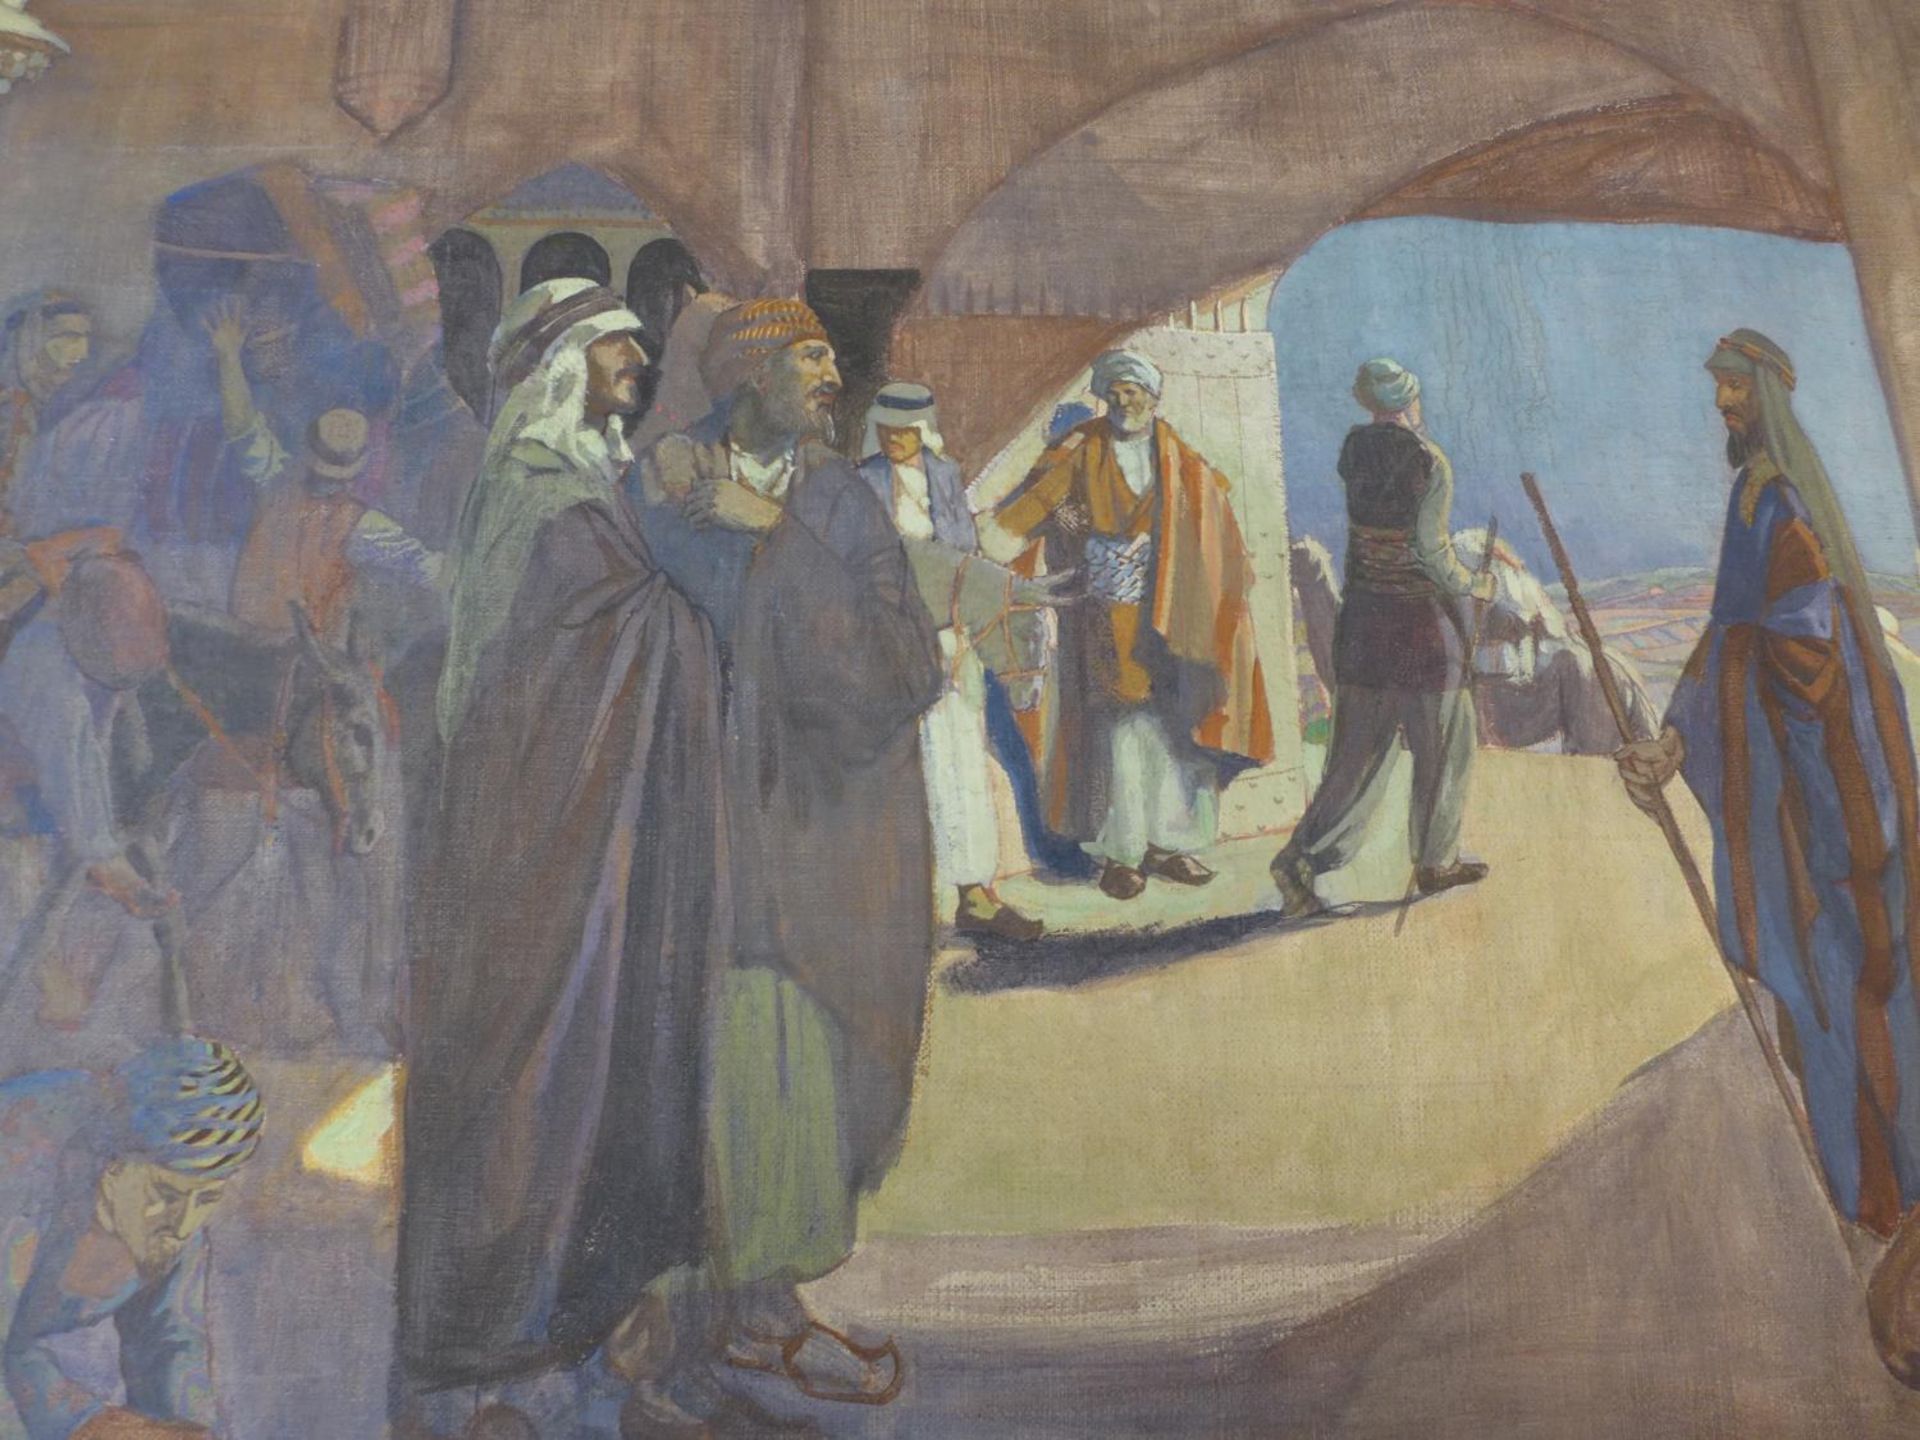 A LARGE EARLY 20TH CENTURY OIL ON CANVAS DEPICTING AN ARAB SCENE, 82X124CM - Image 2 of 5